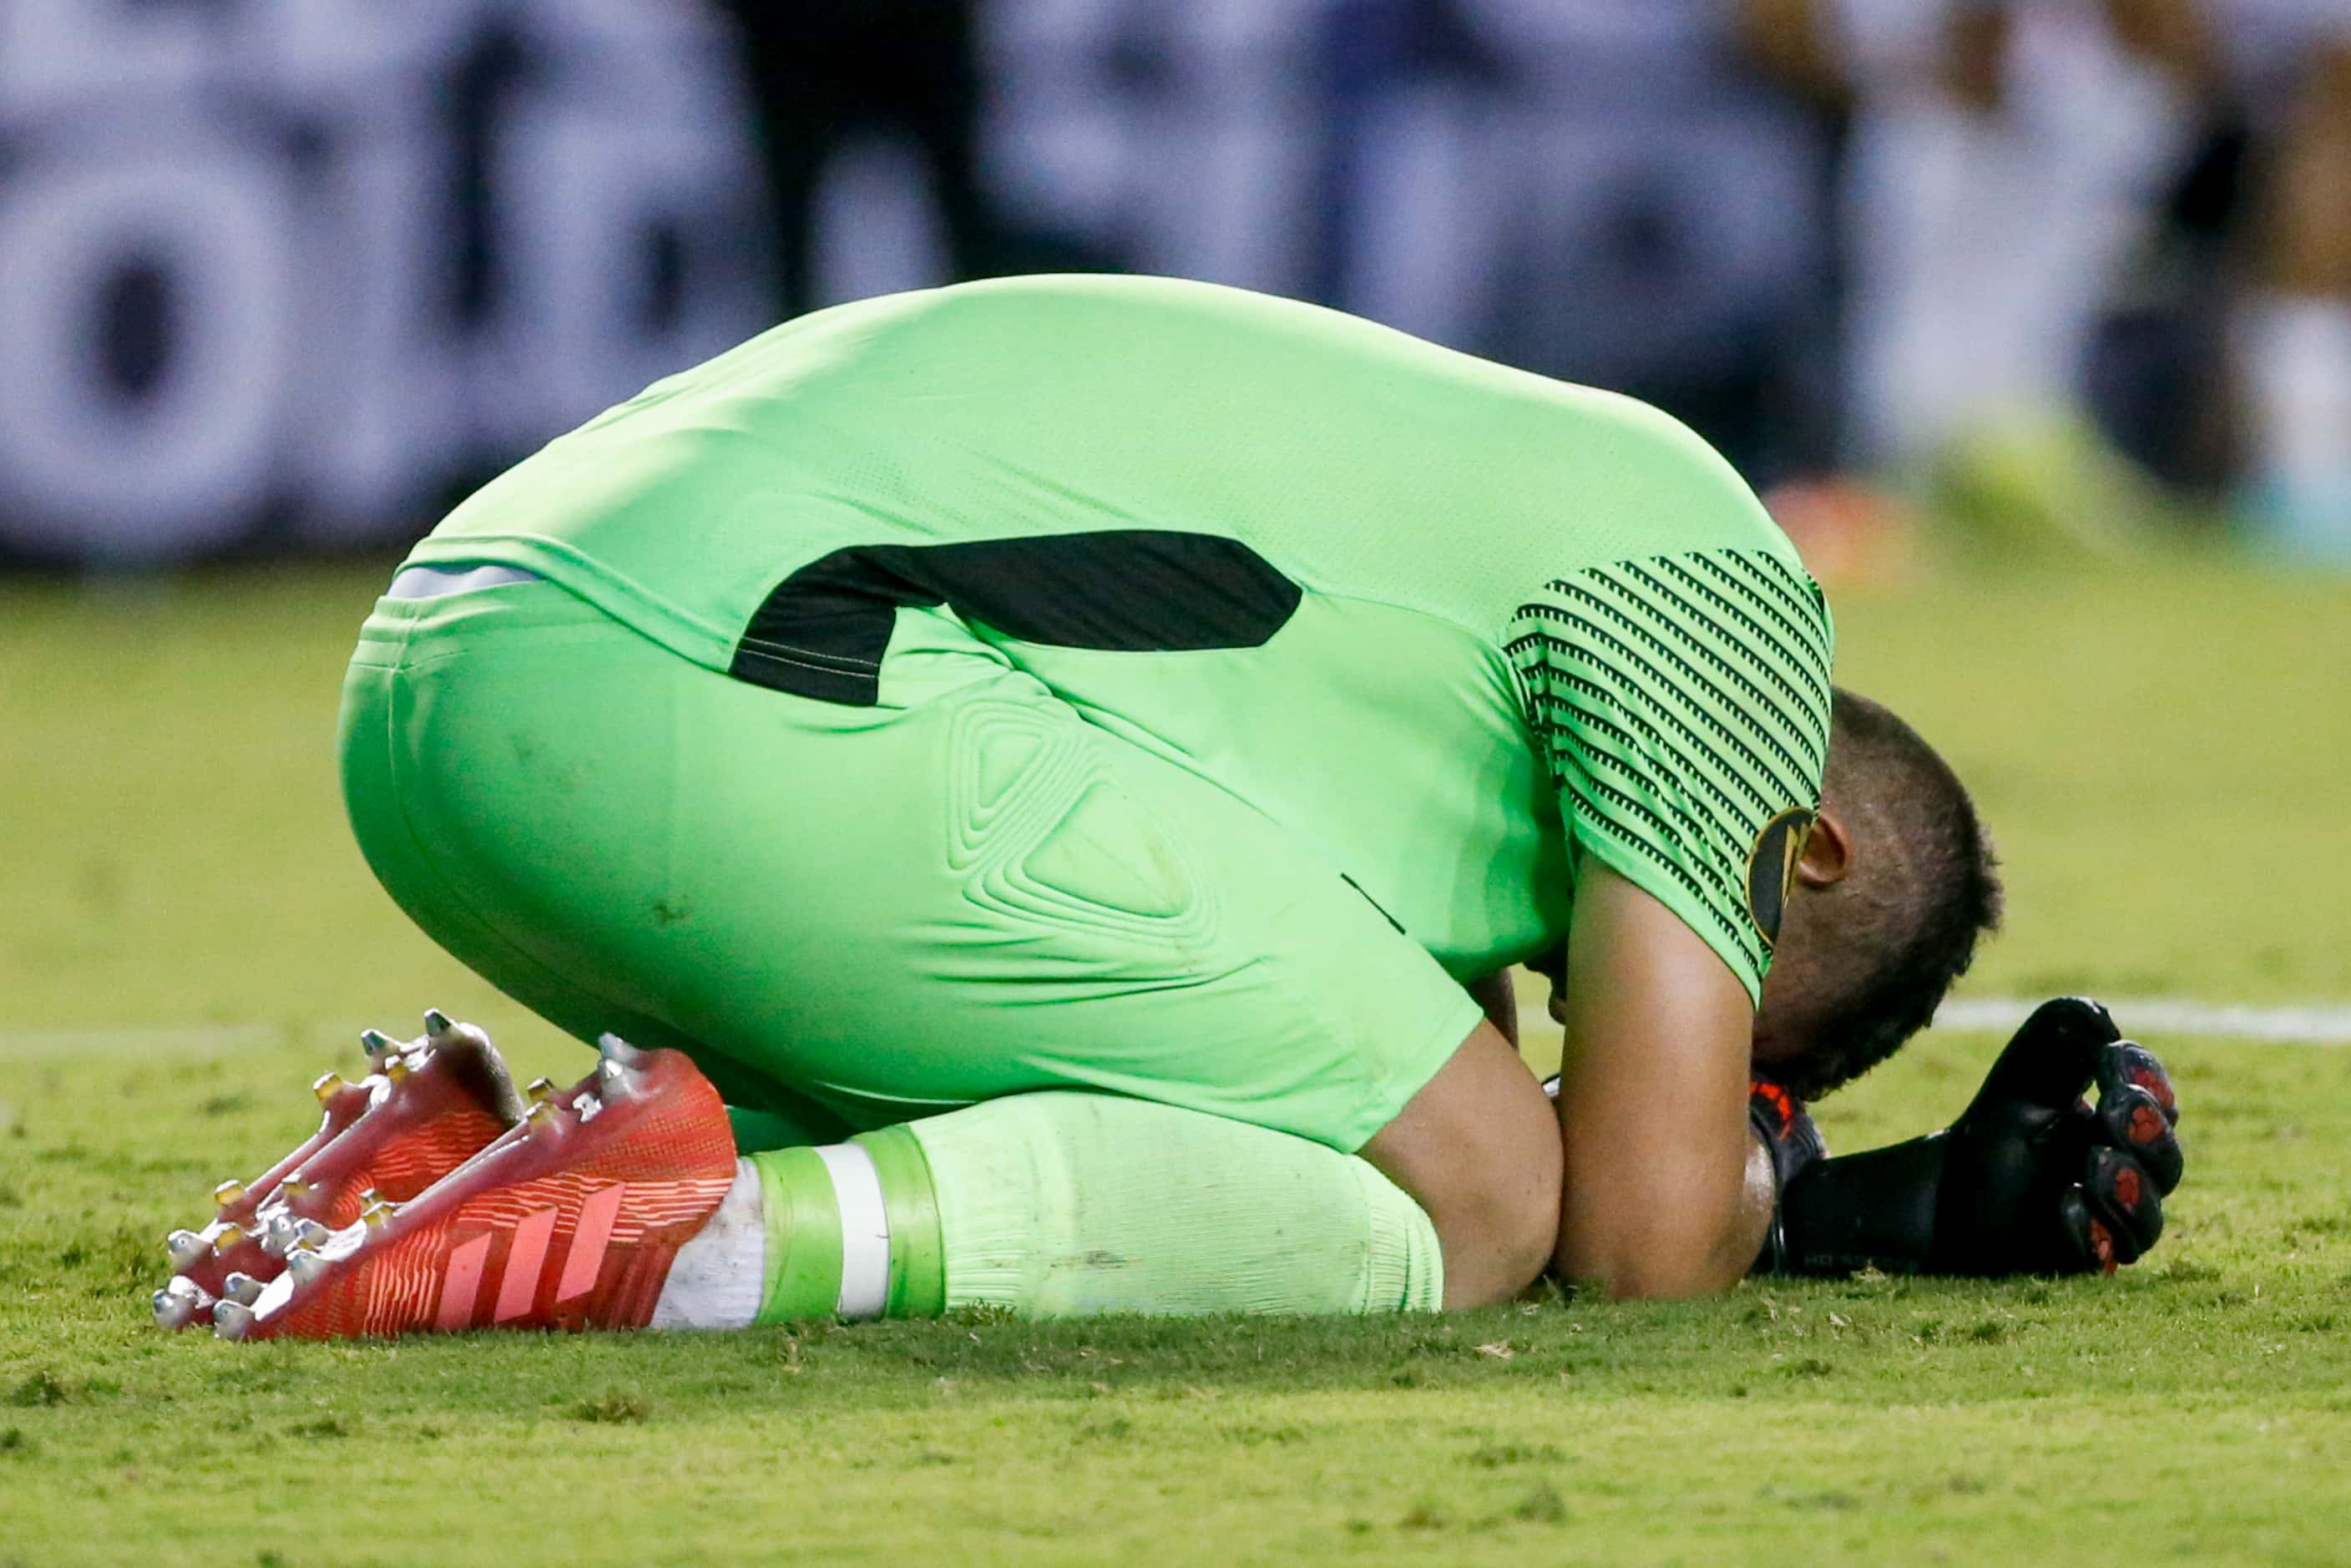 El Salvador goalkeeper Mario González (1) lays on the ground after a 1-0 loss during a...